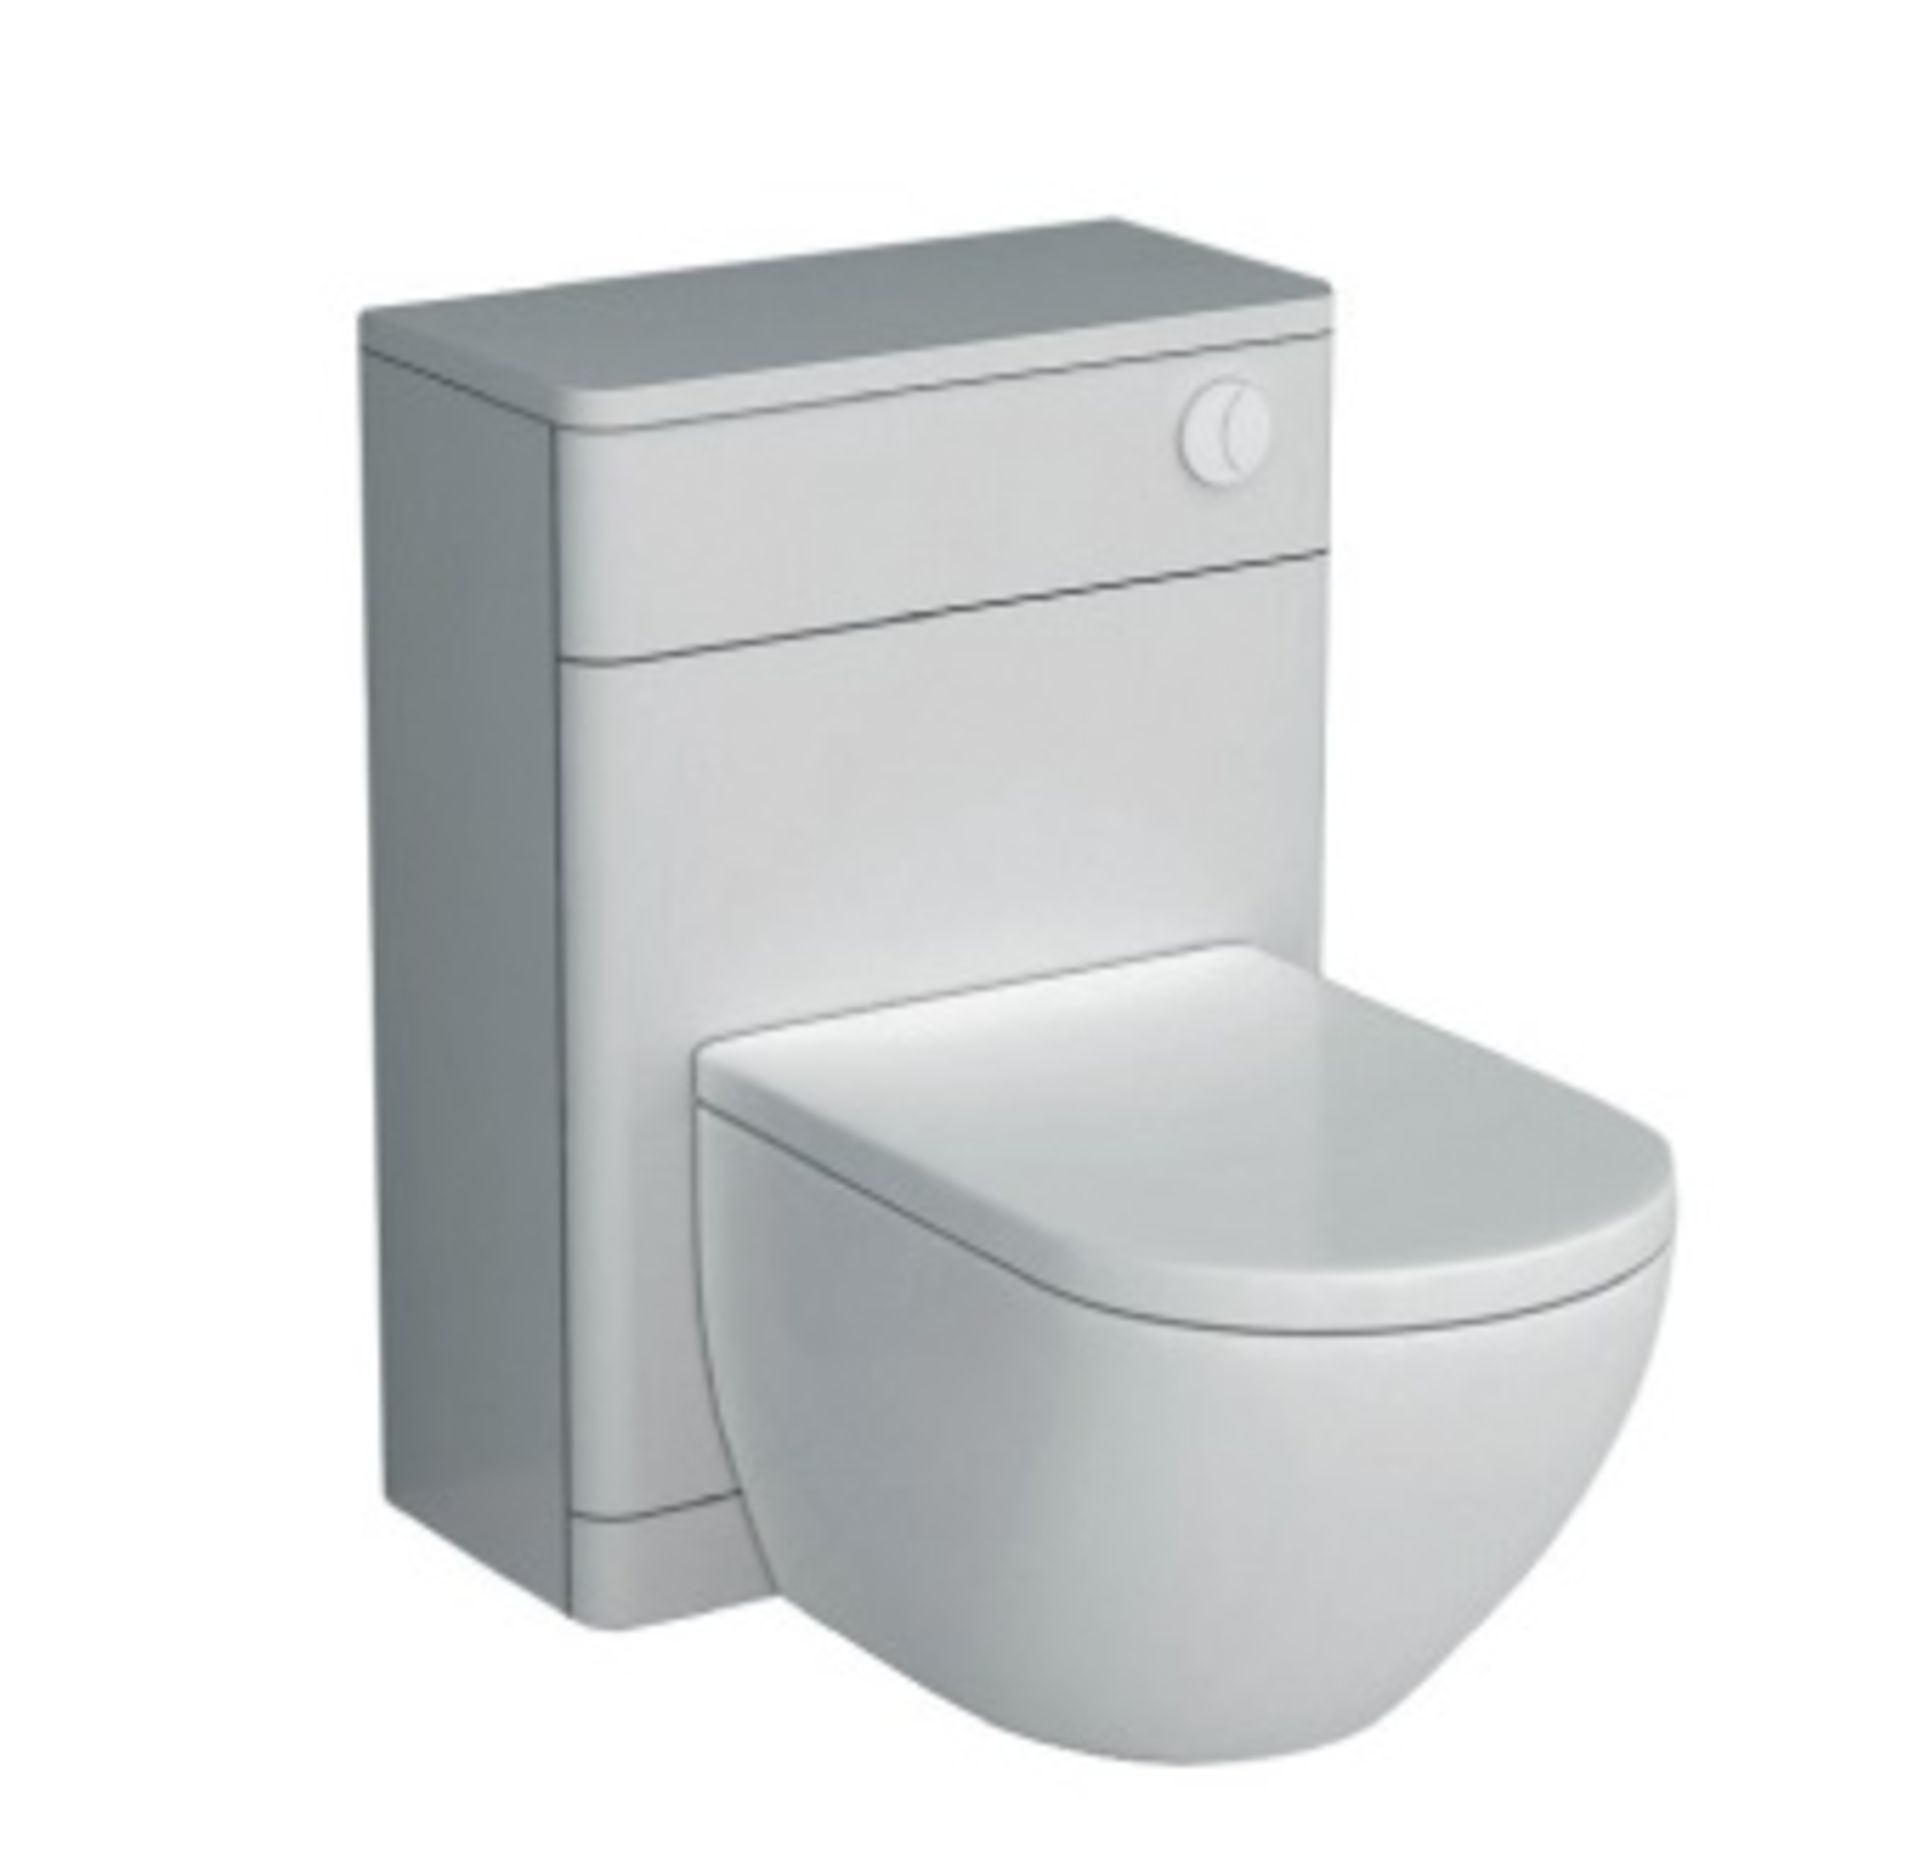 1 x Austin Bathrooms Wall Mounted Bathroom WC Unit With MarbleTECH Top Cover - RRP £320 - High Gloss